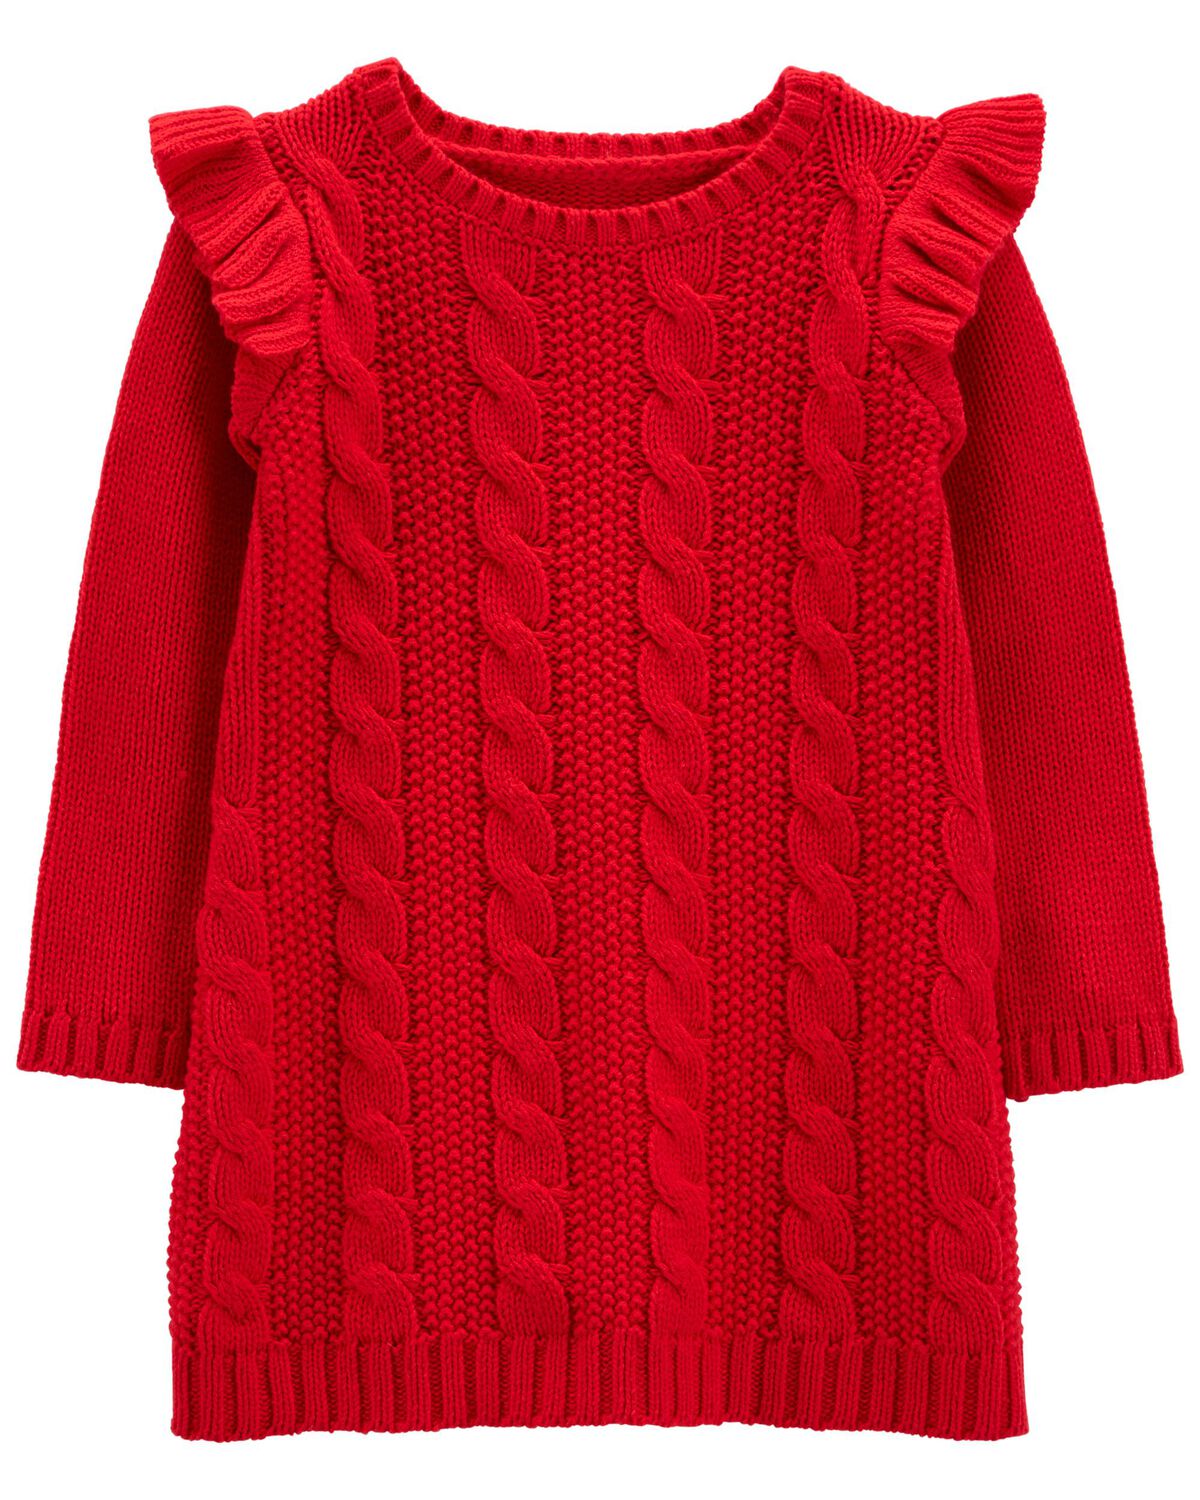 Toddler Cable Knit Sweater Dress